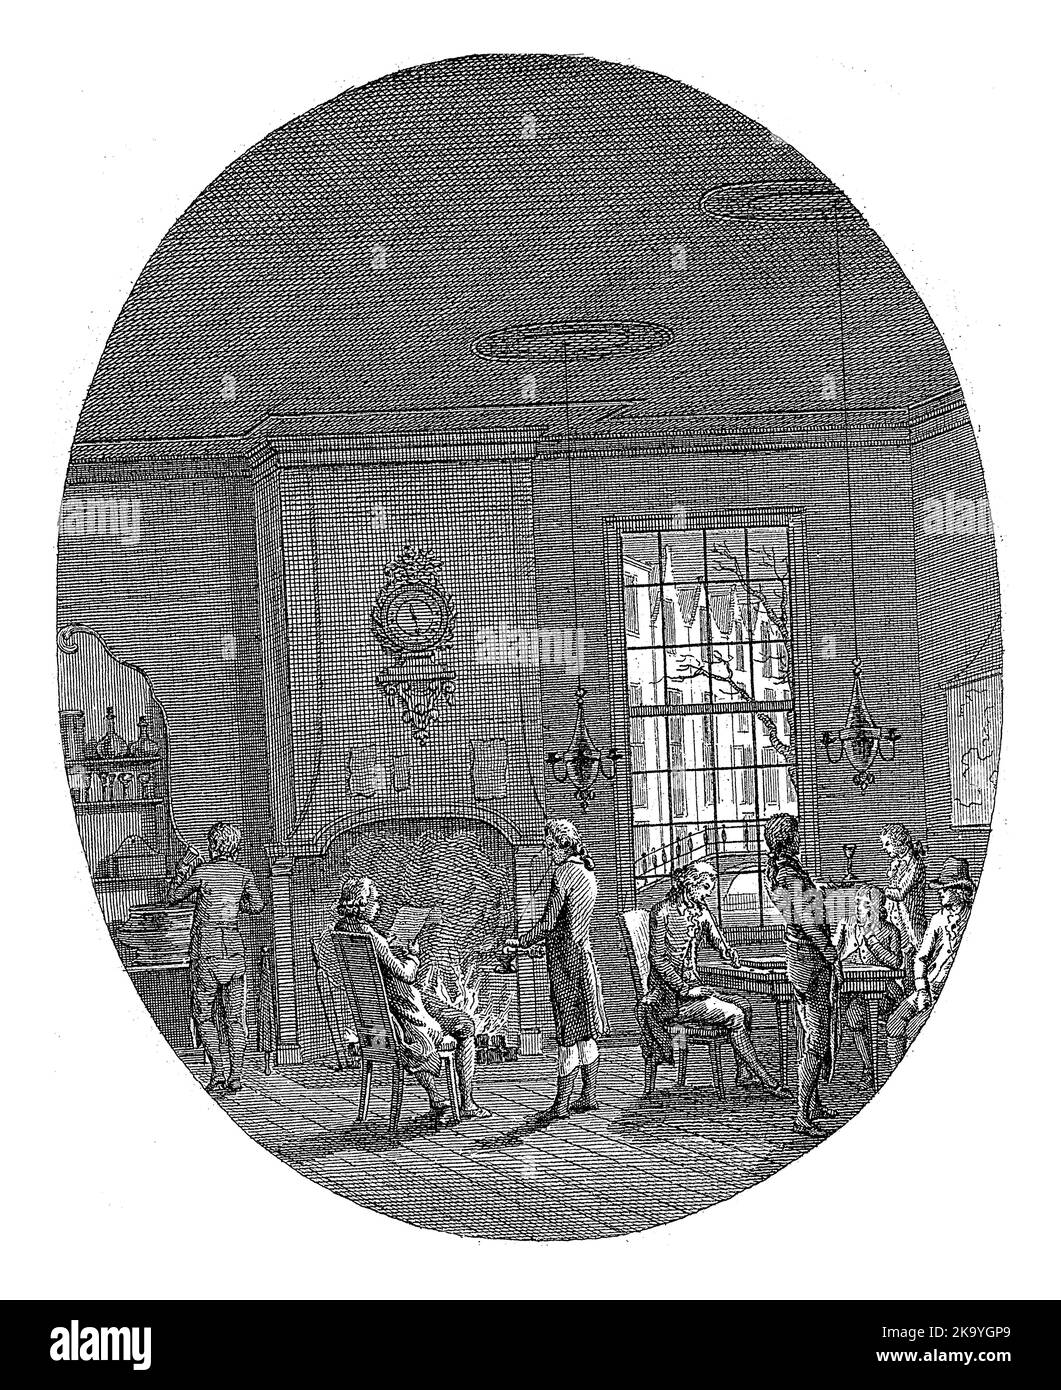 The interior of a coffee house in an oval frame. Several men are standing and sitting in a room with a fireplace. The men smoke, read the newspaper or Stock Photo